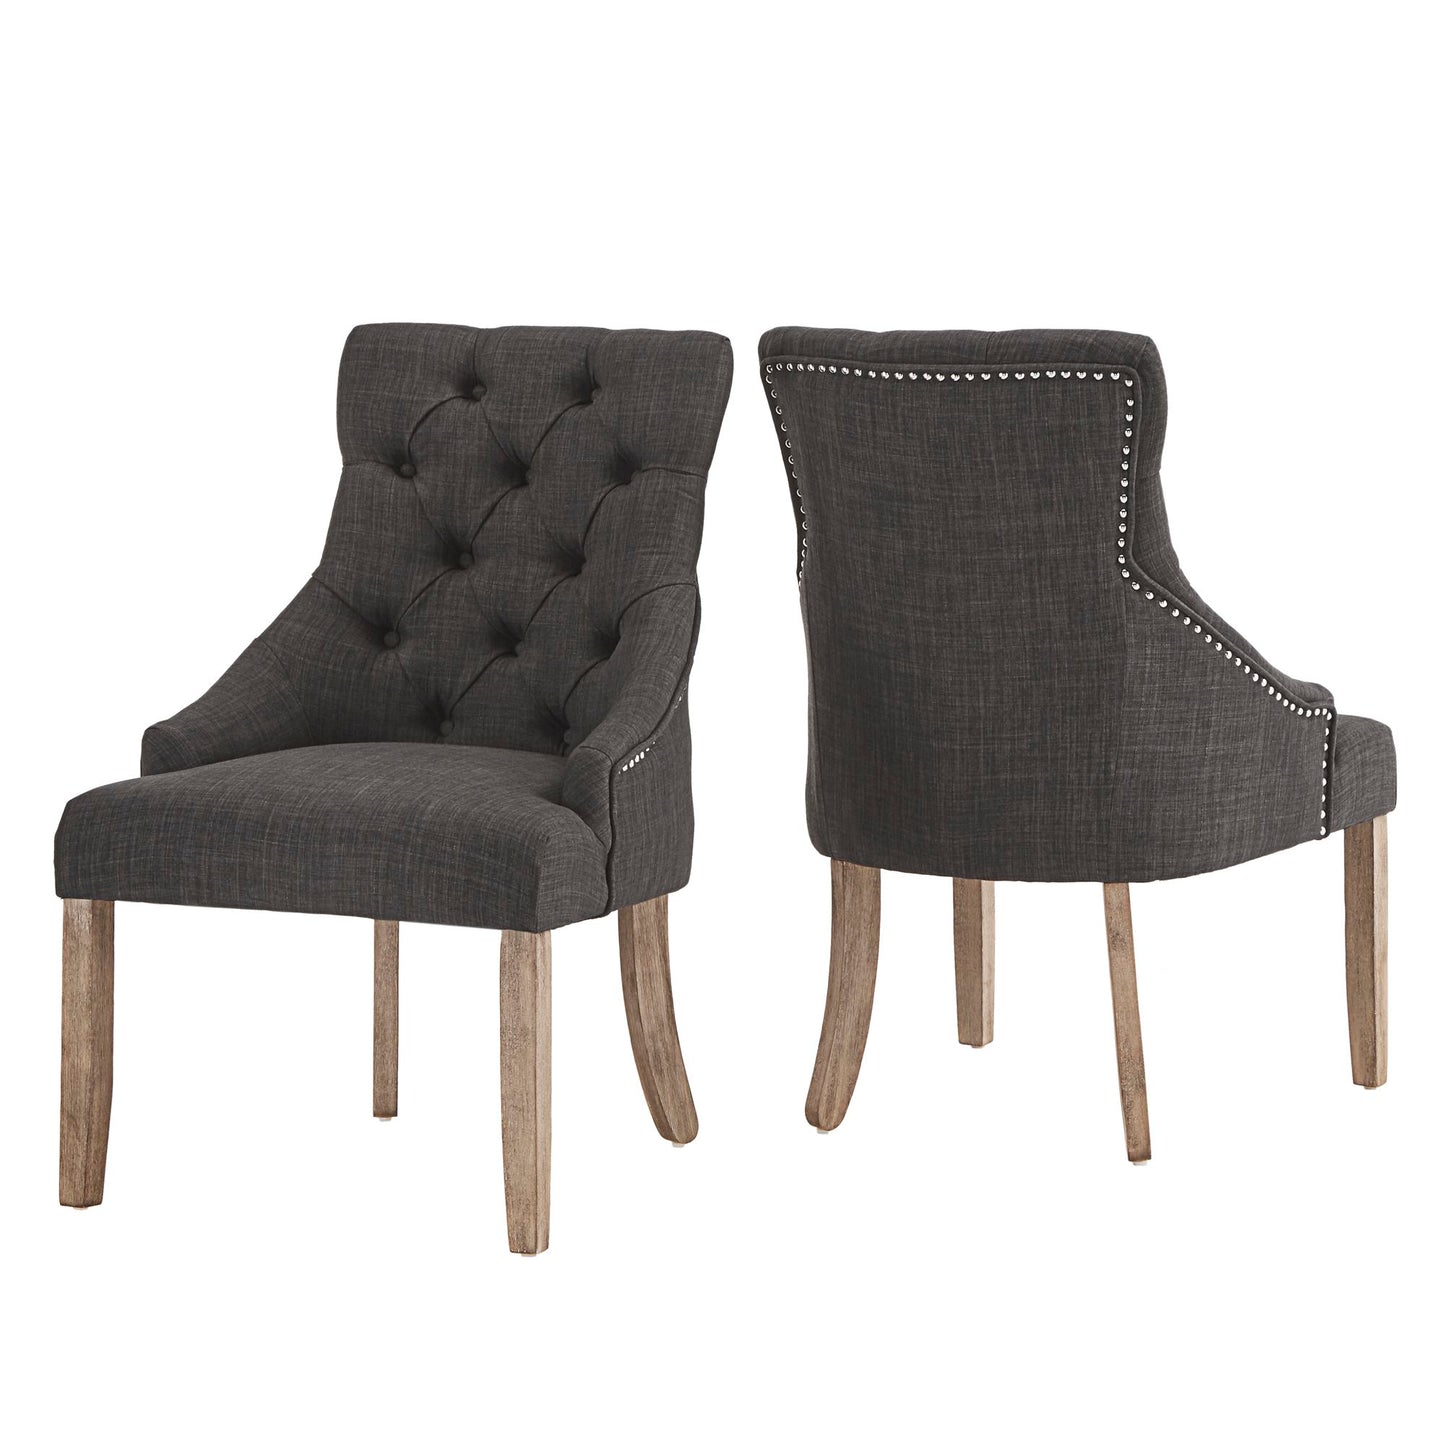 Round 7-Piece Dining Set with Wingback Chairs - Grey Finish, Dark Grey Linen